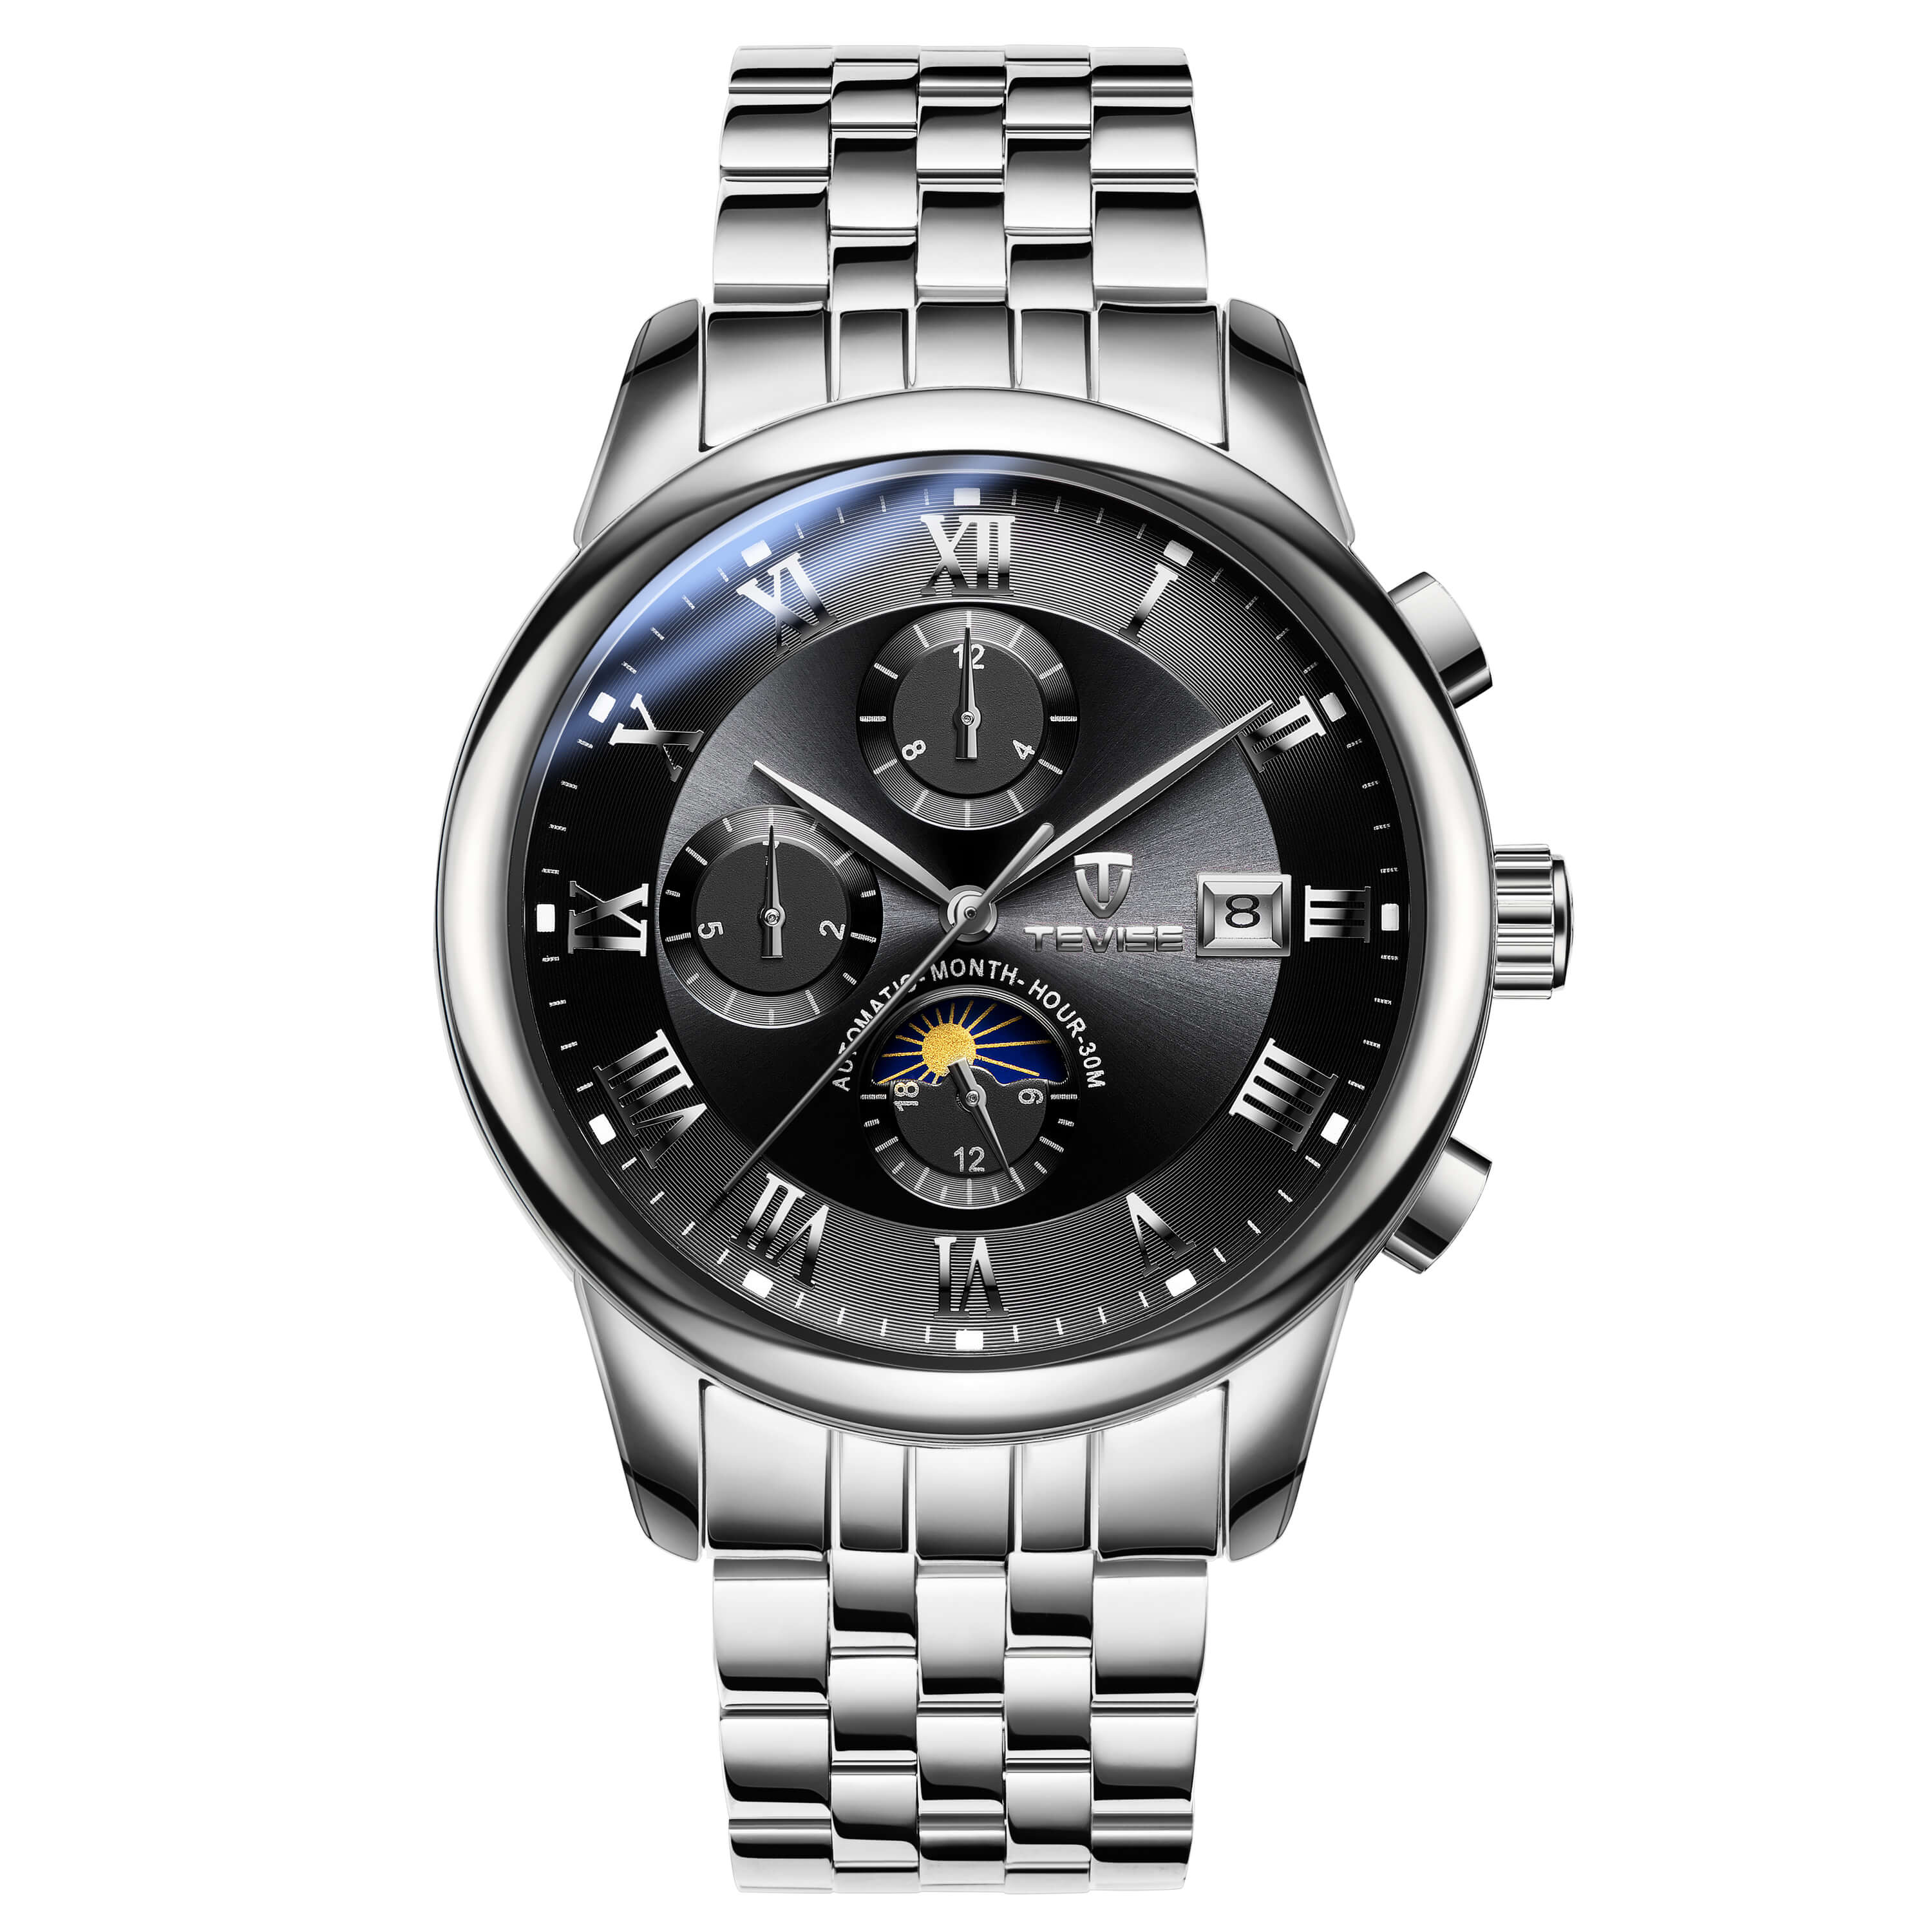 TEVISE 9008 Men's Automatic Mechanical Men's Watch Moon Phase Stainless Steel - Silver Blue